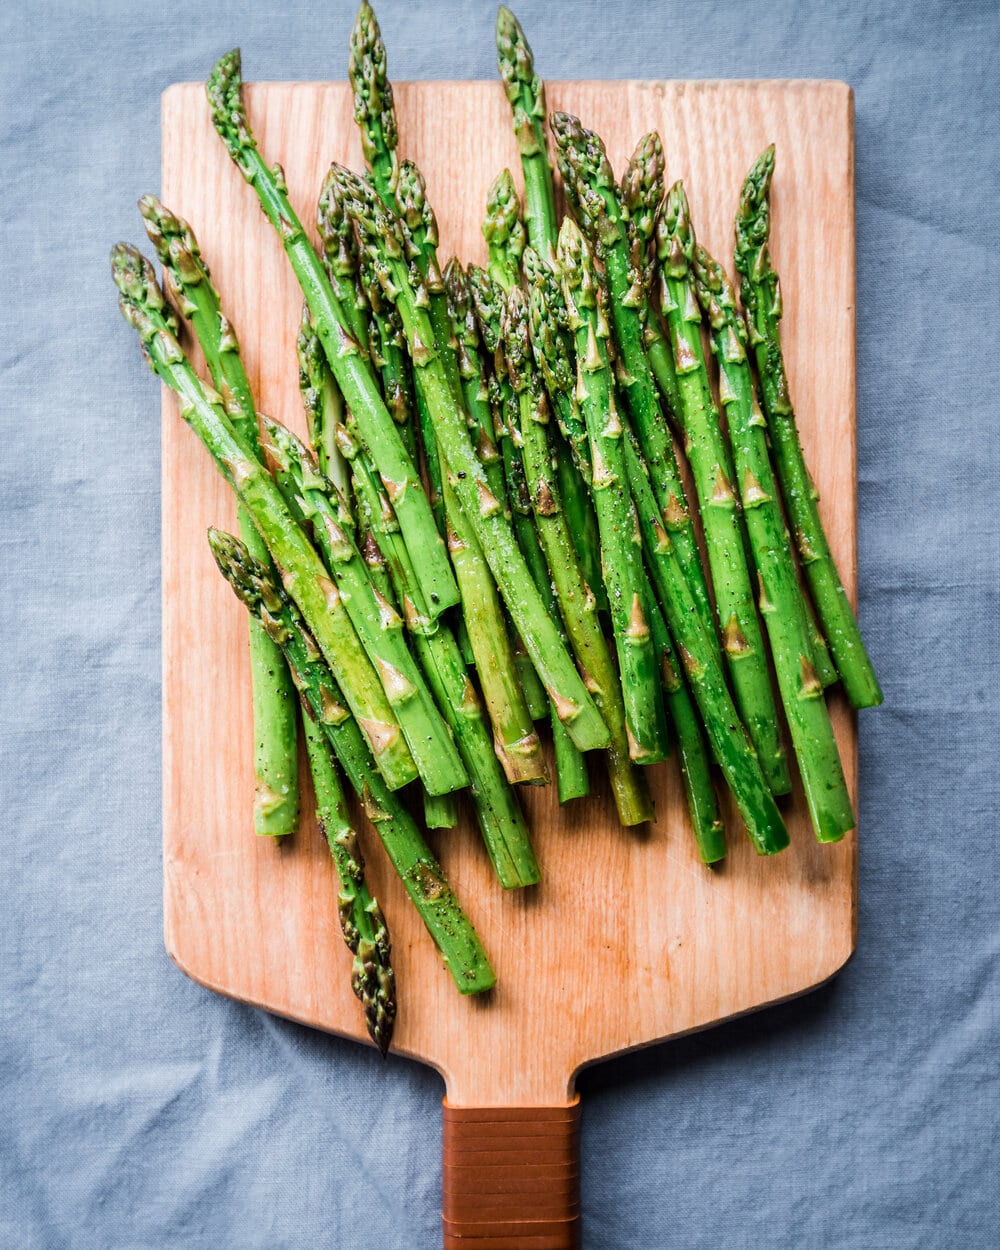 Asparagus spears on a small wooden cutting board.